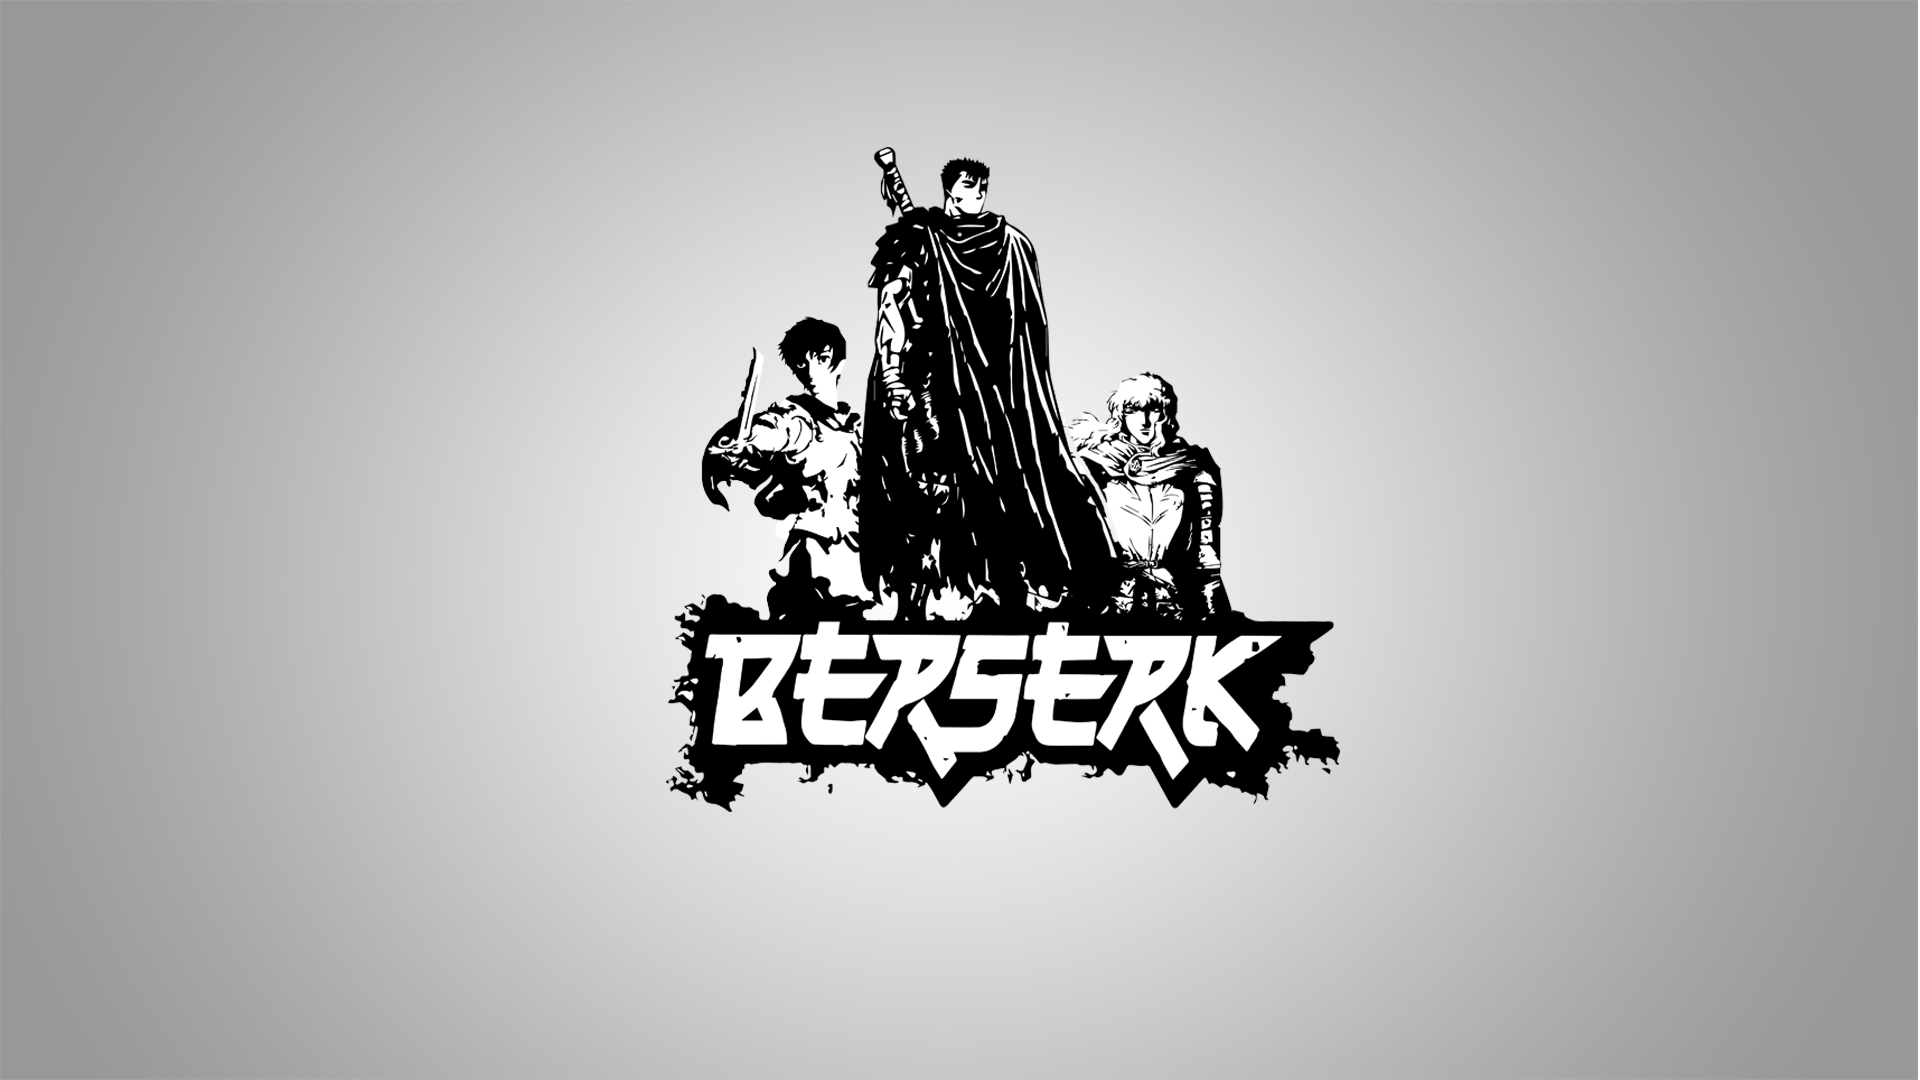 One of the more detailed wallpaper I have created [Berserk]